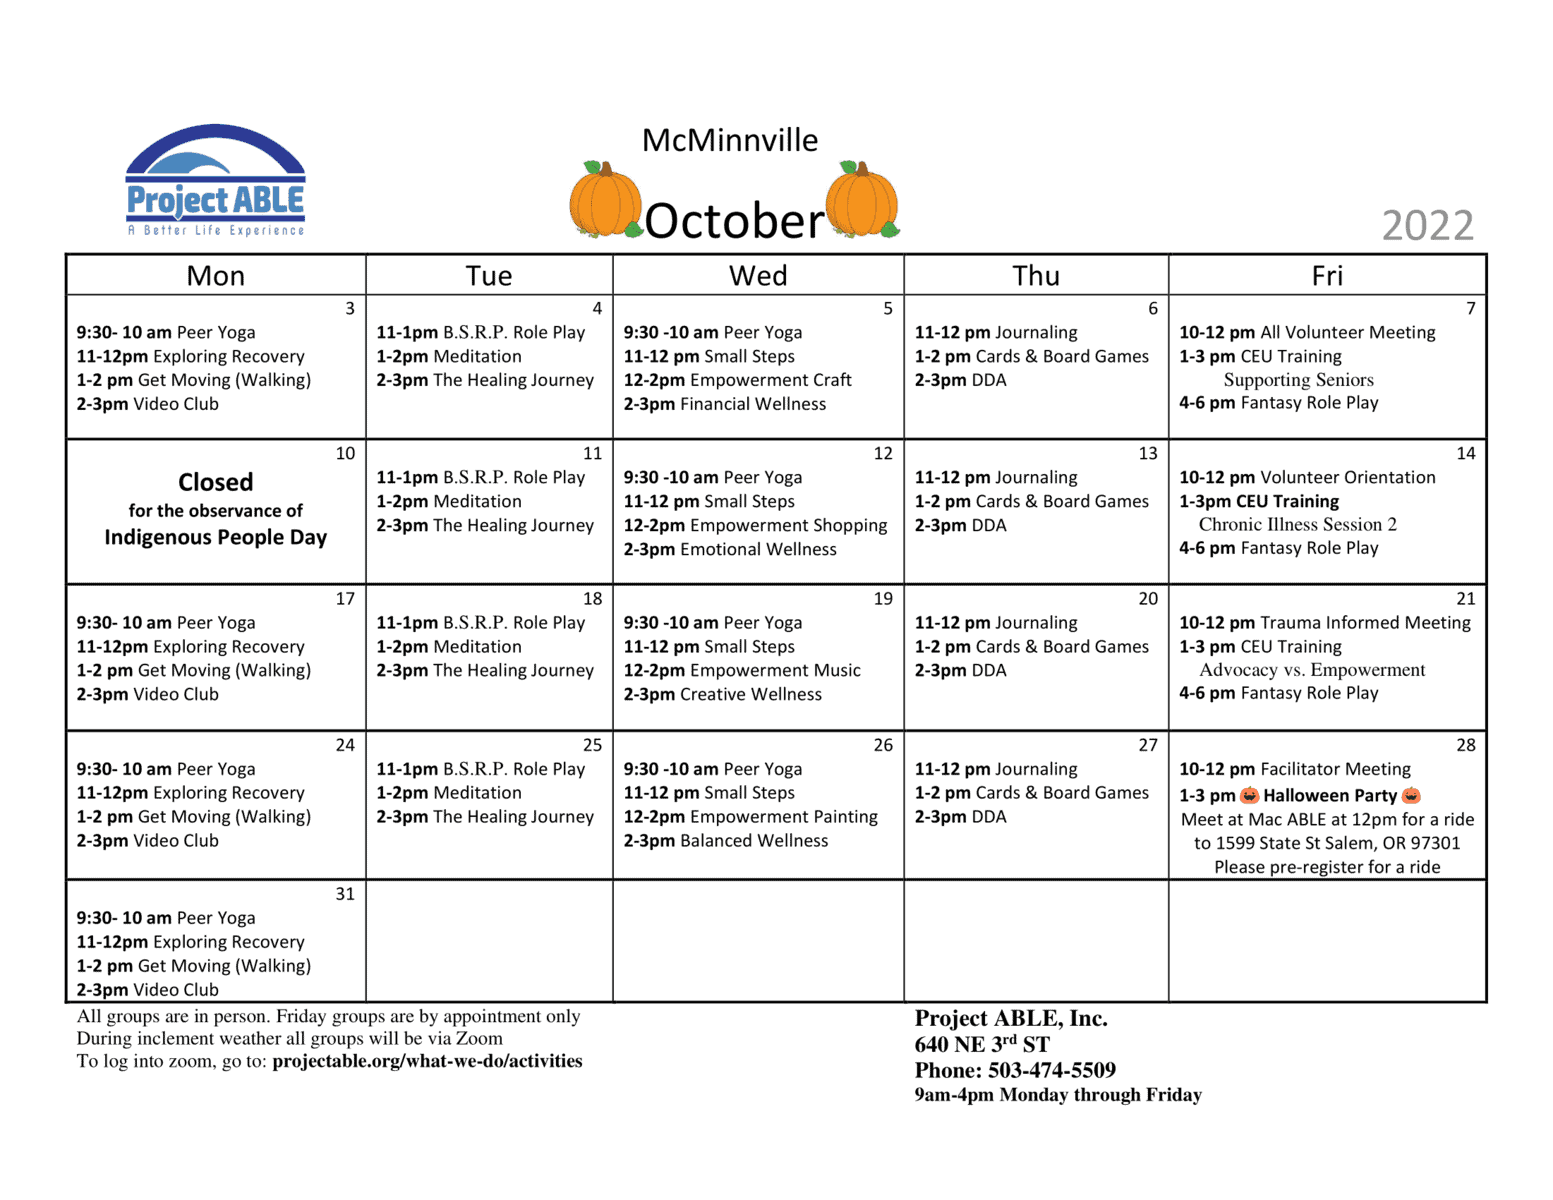 McMinnville Activities Calendar Project ABLE